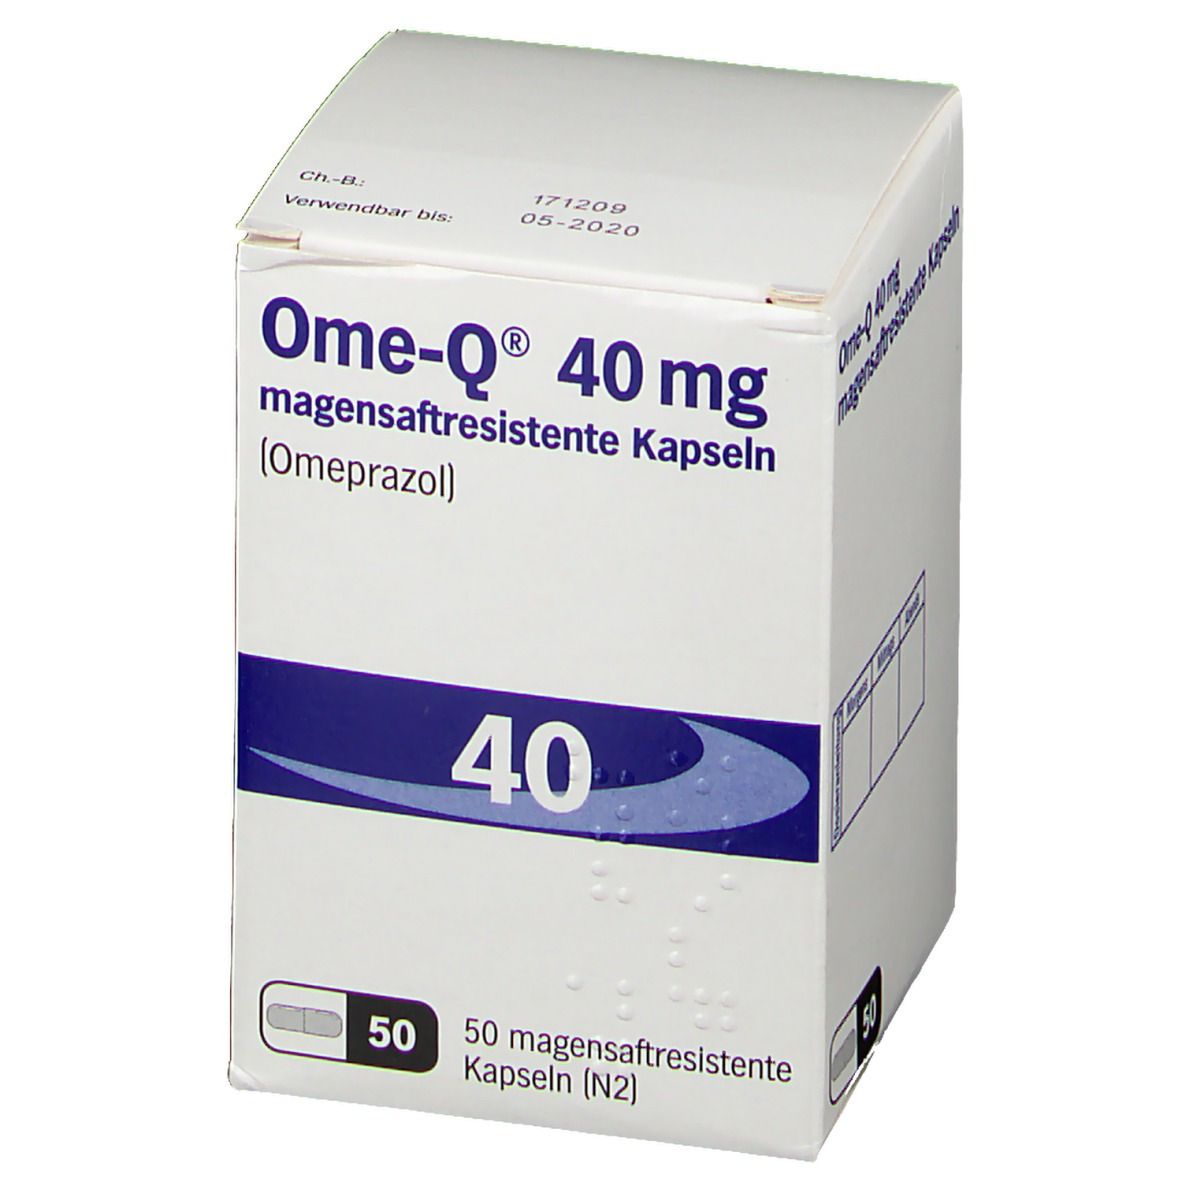 Ome-Q® 40 mg